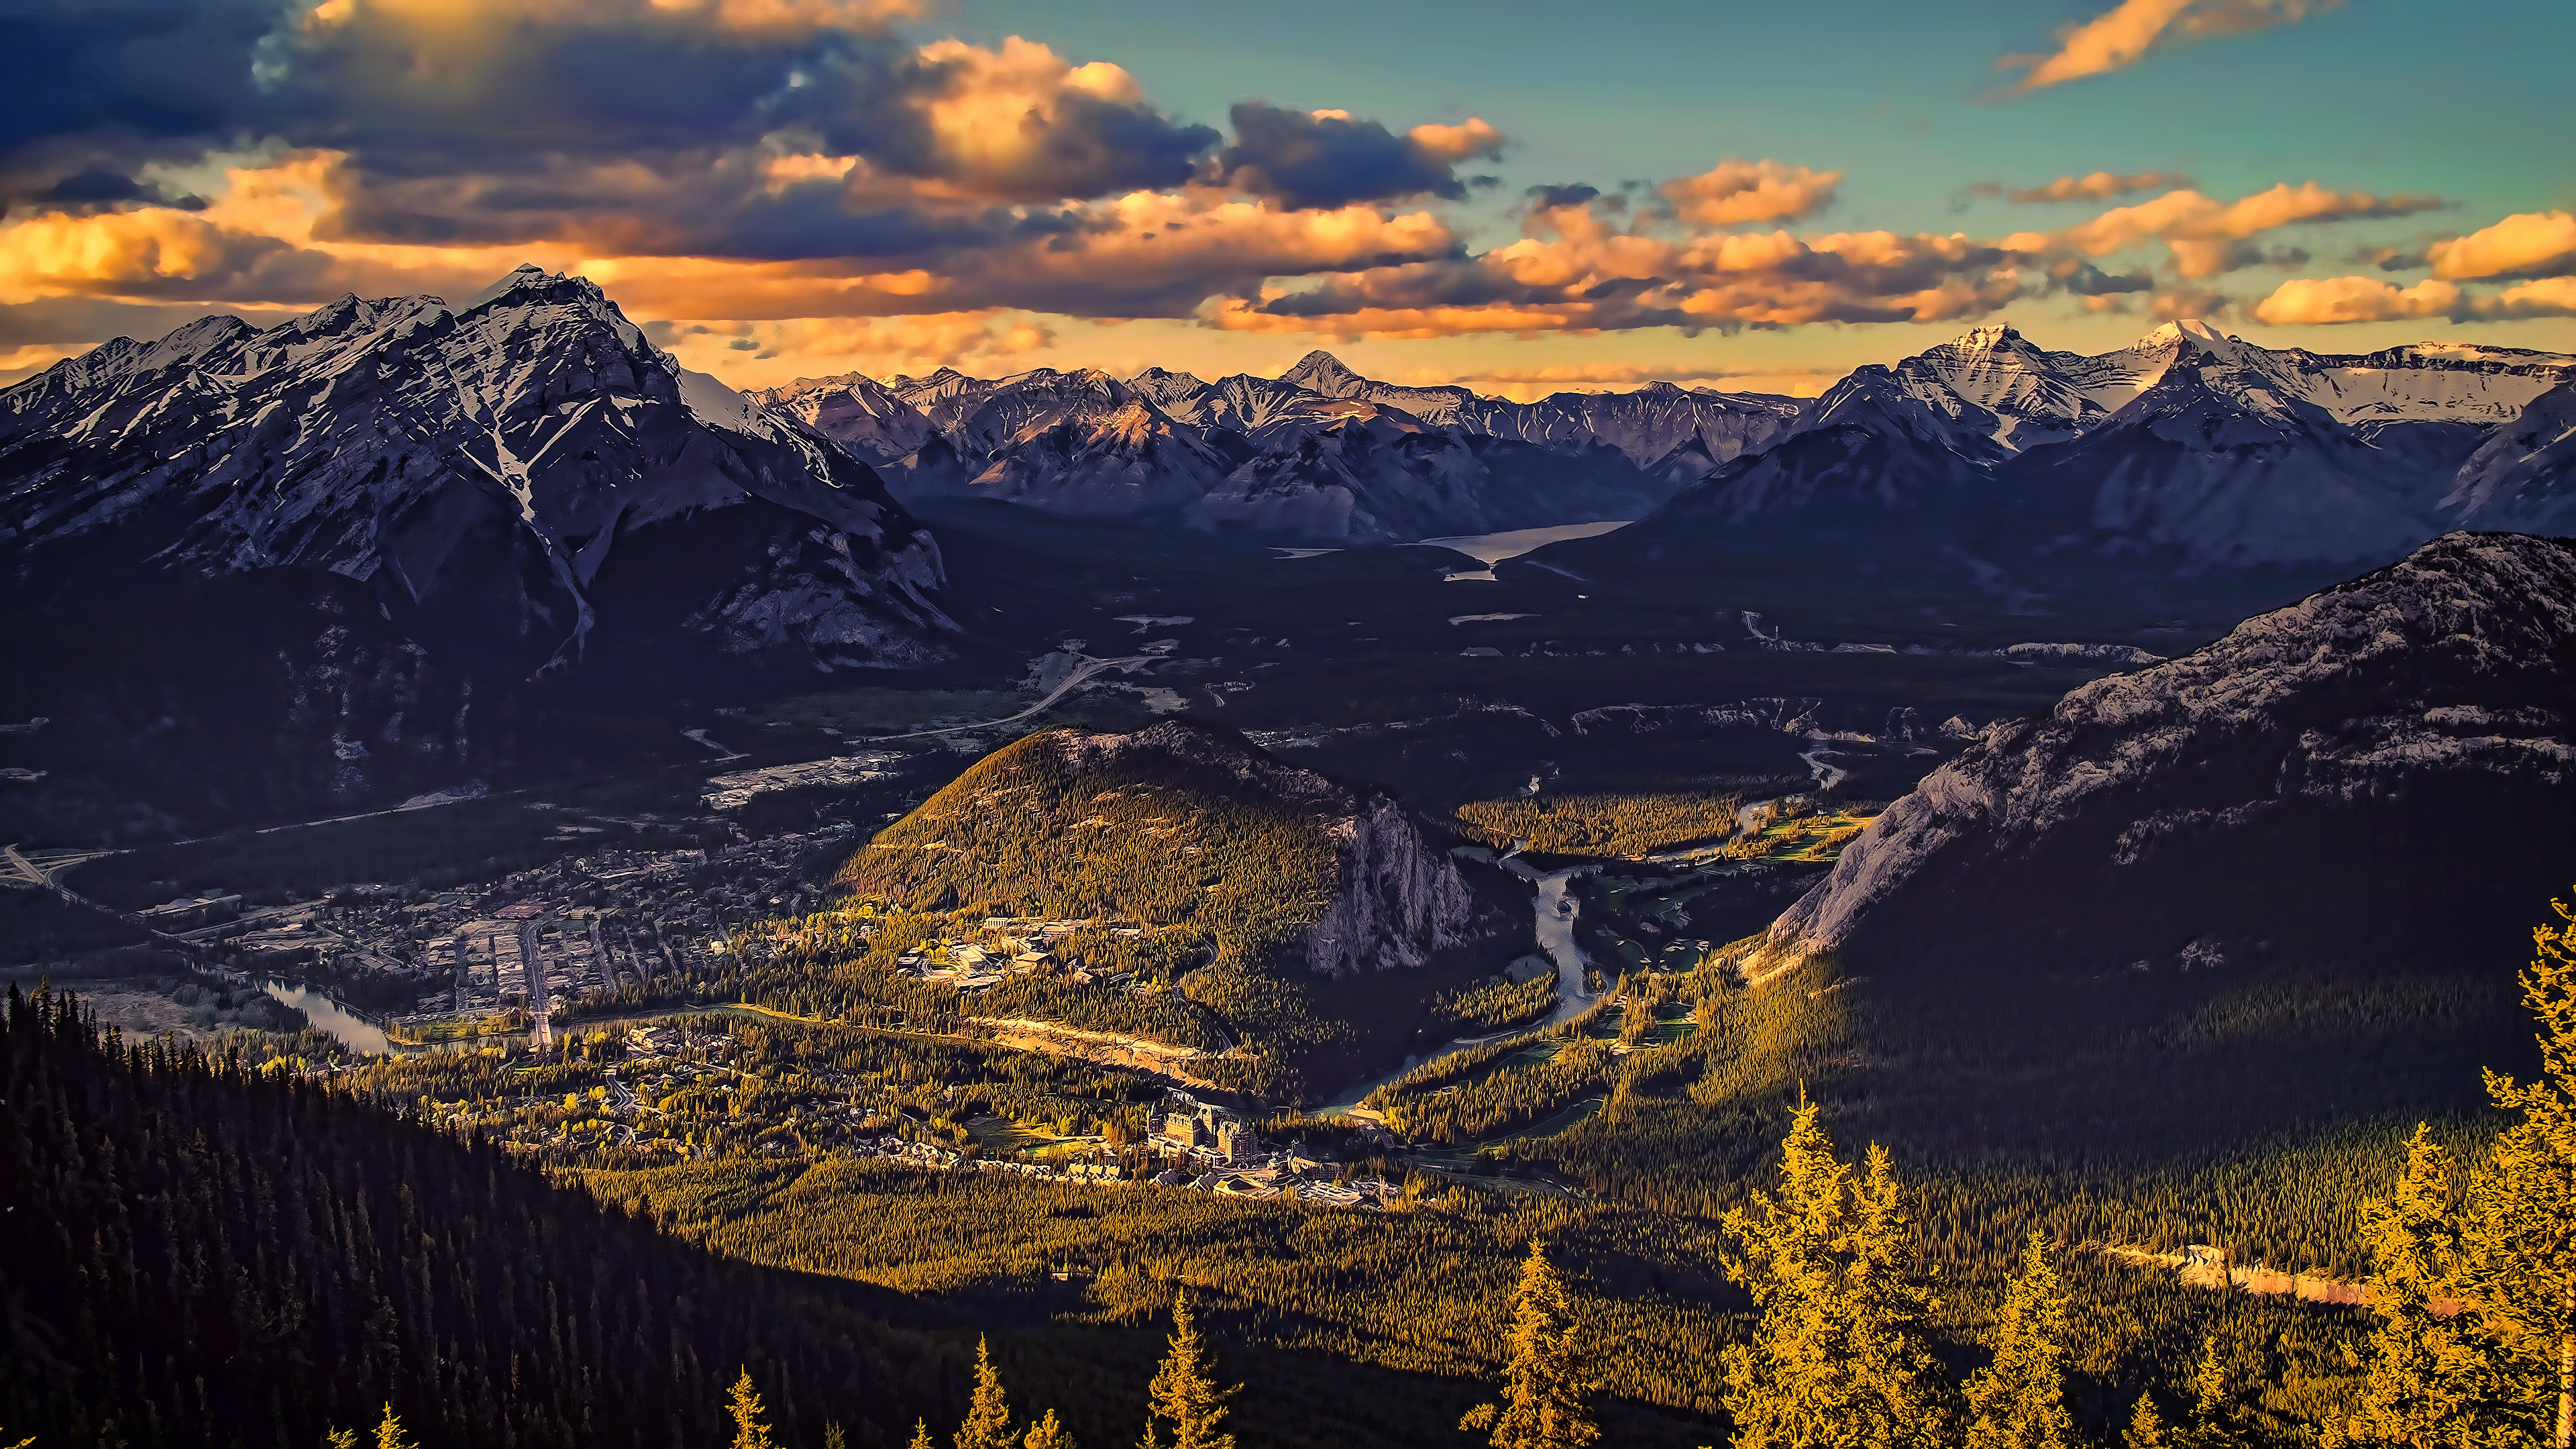 General 3840x2160 landscape nature mountains sunset valley panorama sunlight Banff